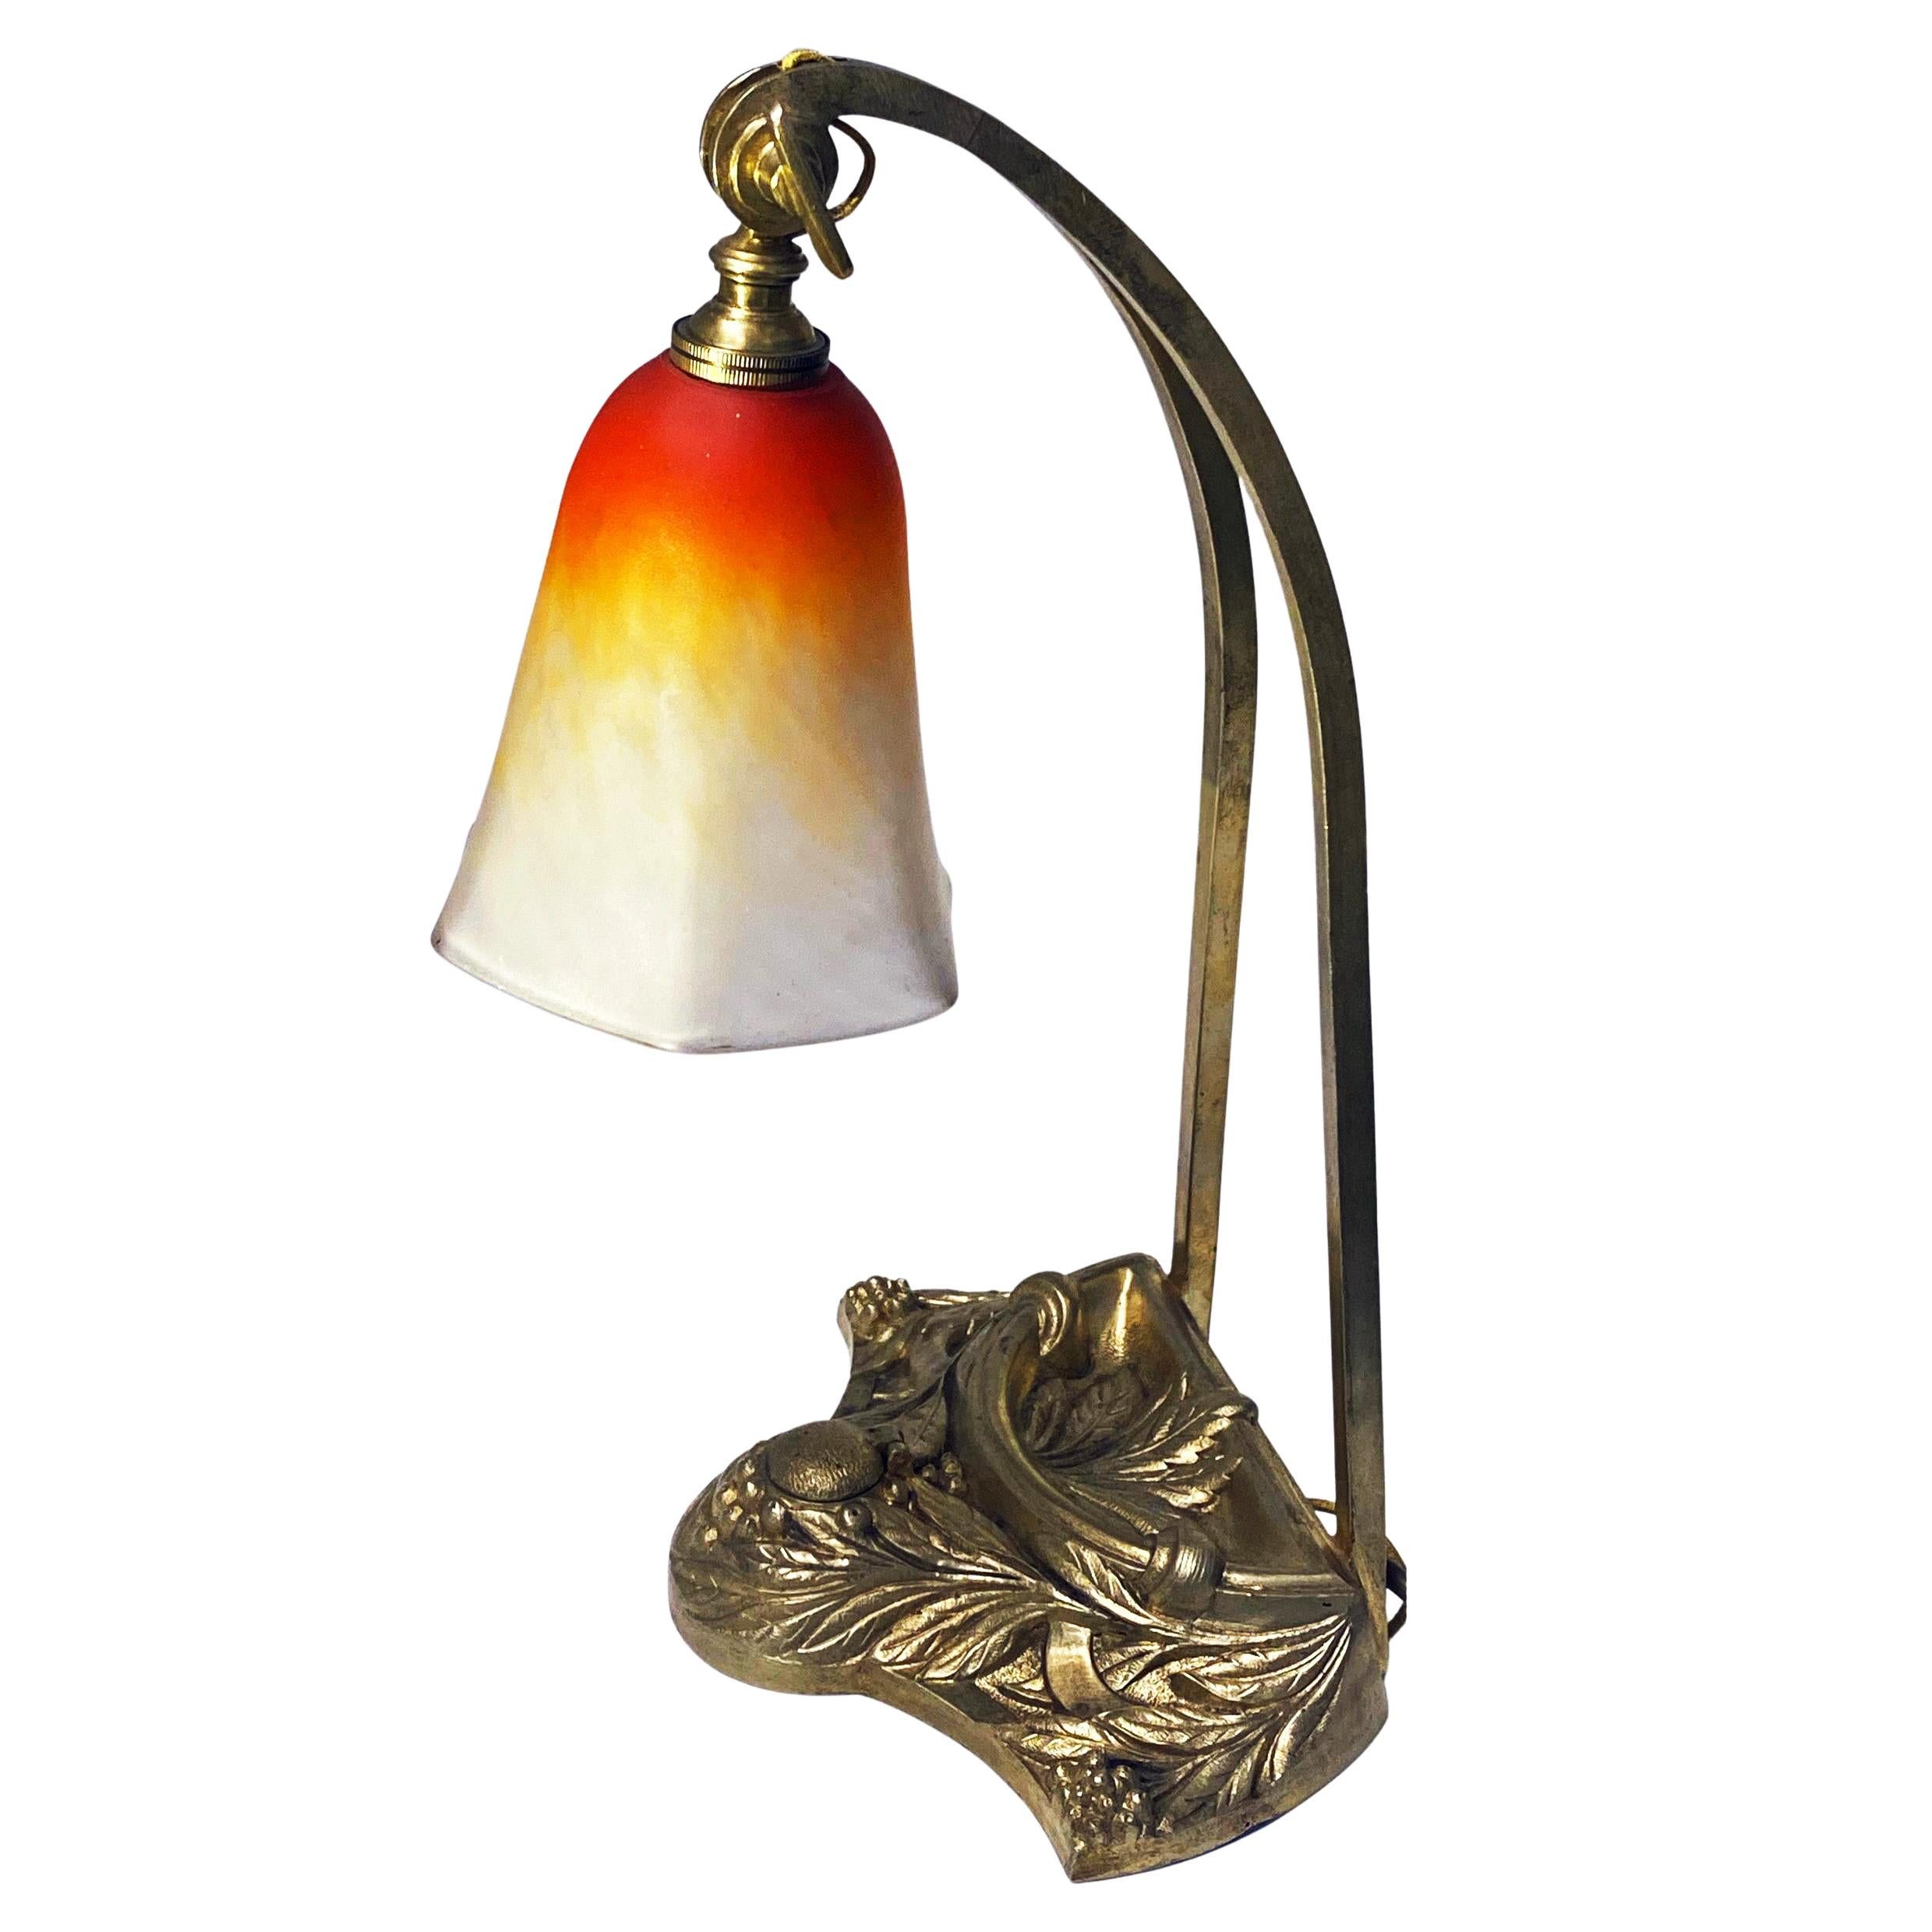 French Art Nouveau desk table lamp by Charles Schneider (Epinay-sur-Seine, Paris), France, C.1920 on stylised bronze base. The base also with concealed opening for an inkwell. The glass shade was made of blown double glass. Measures approximately